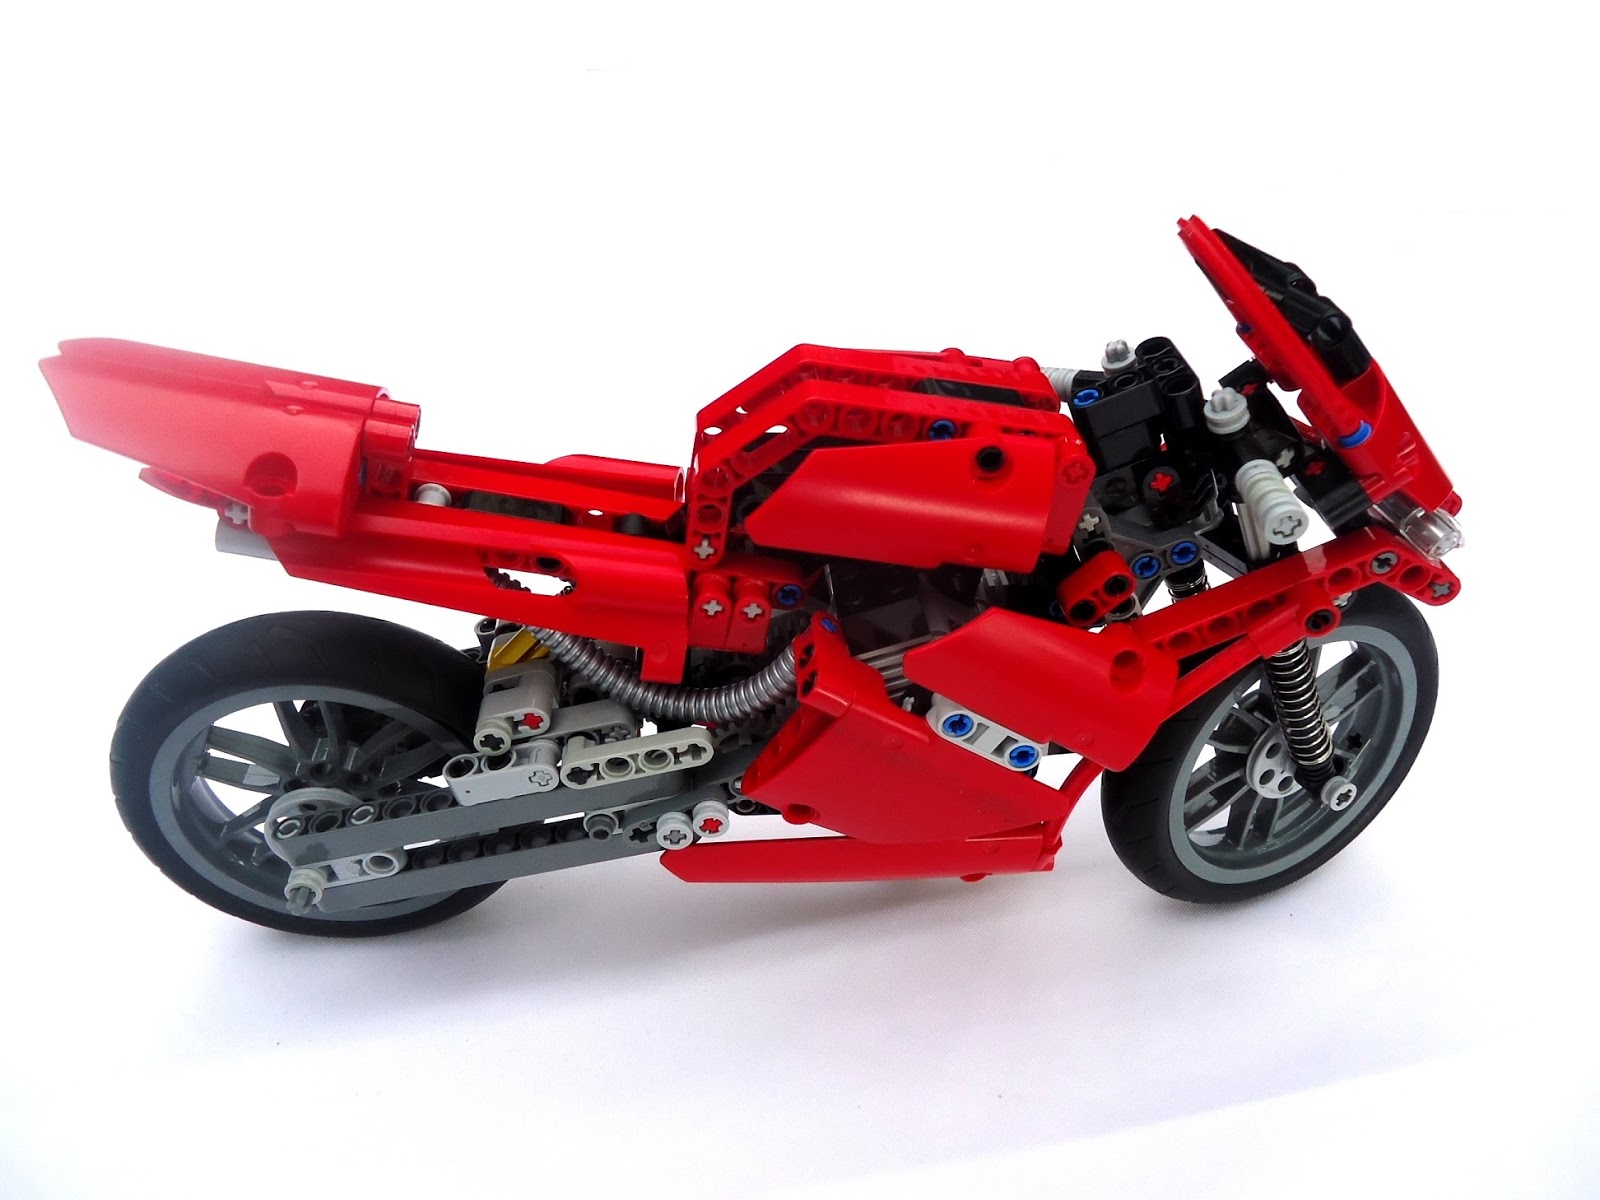 LEGO TECHNIC MOTORCYCLES: [MOD] 42036 Street Motorcycle with Gearbox by Spiderbrick